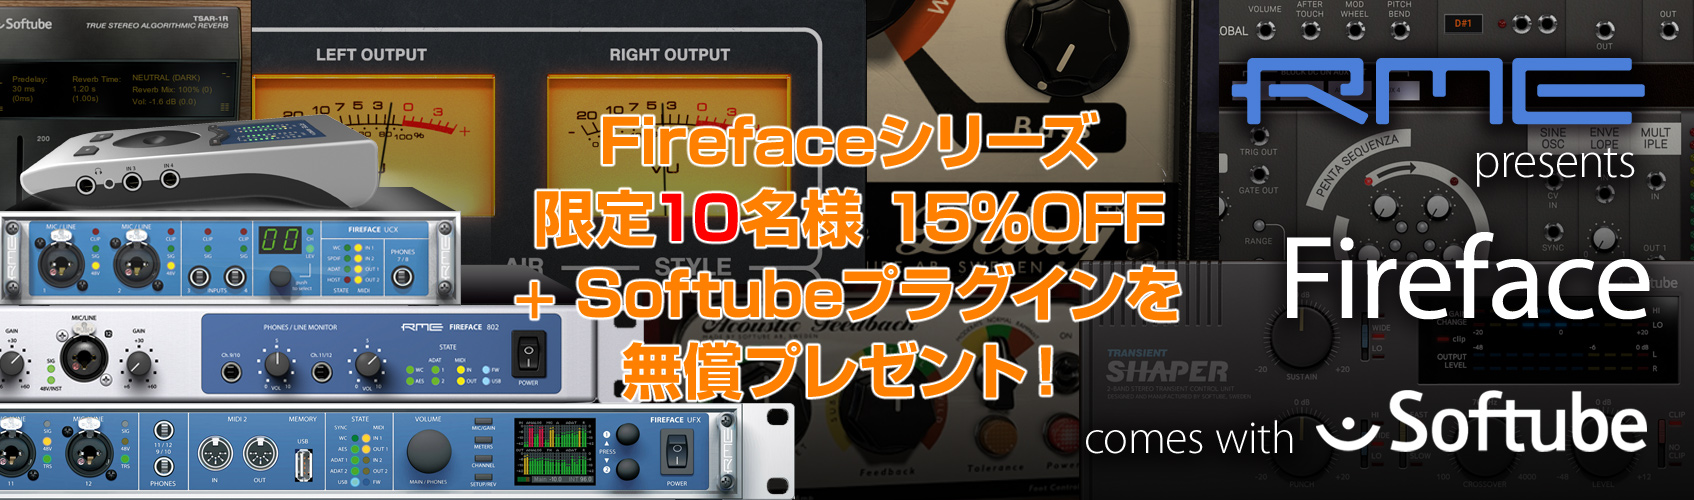 RME Fireface comes with Softube